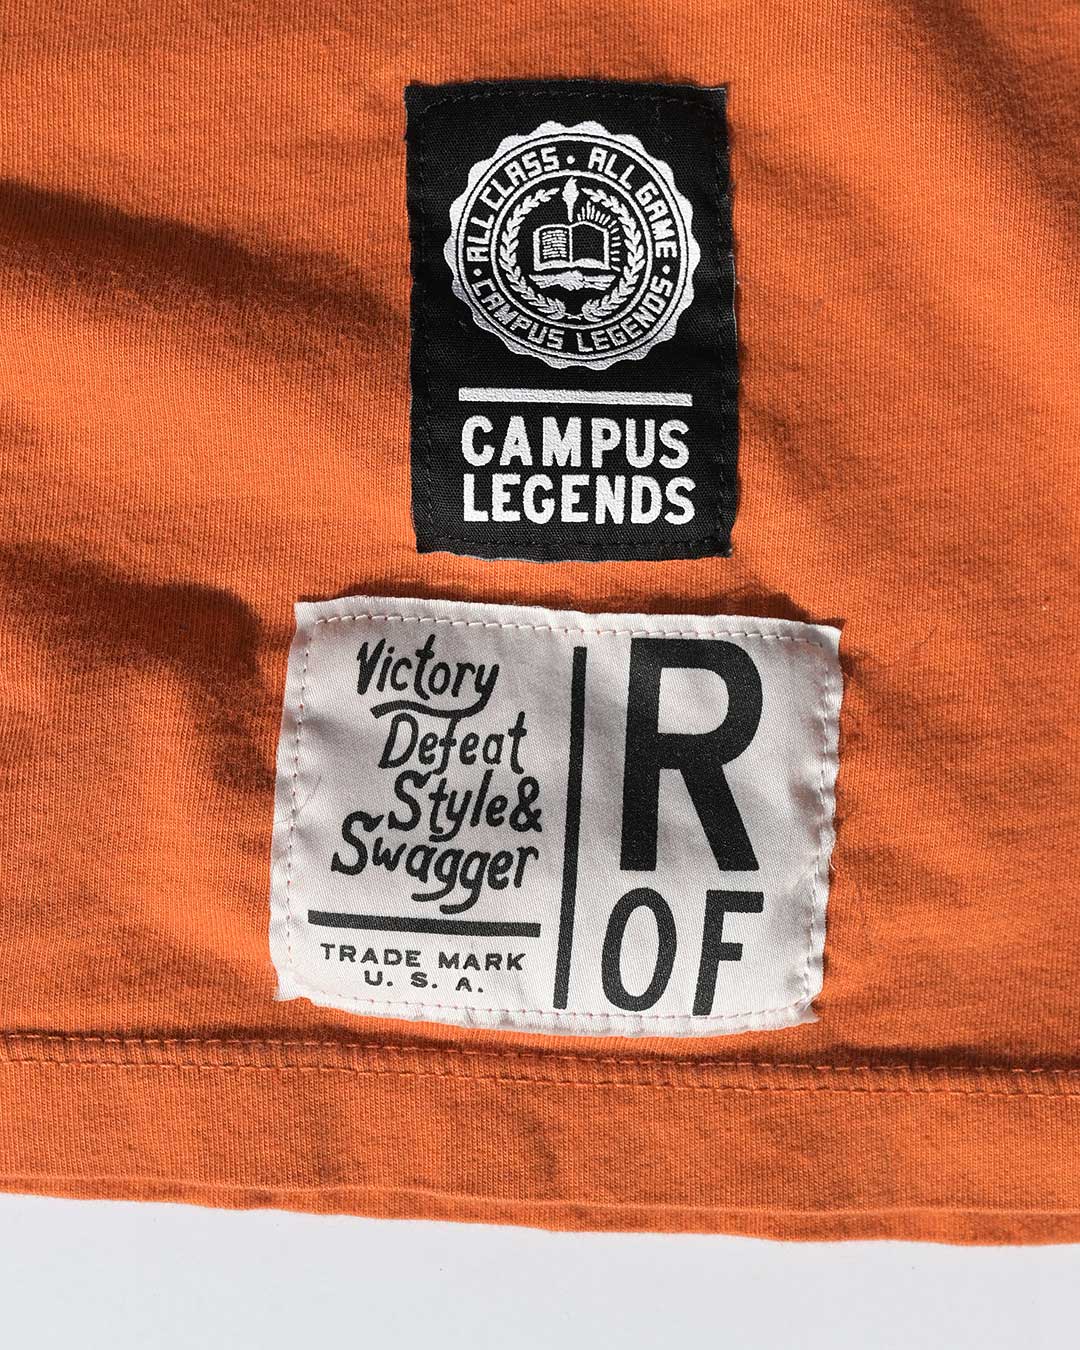 Syracuse Ath. Dept. Orange Tee - Roots of Fight Canada